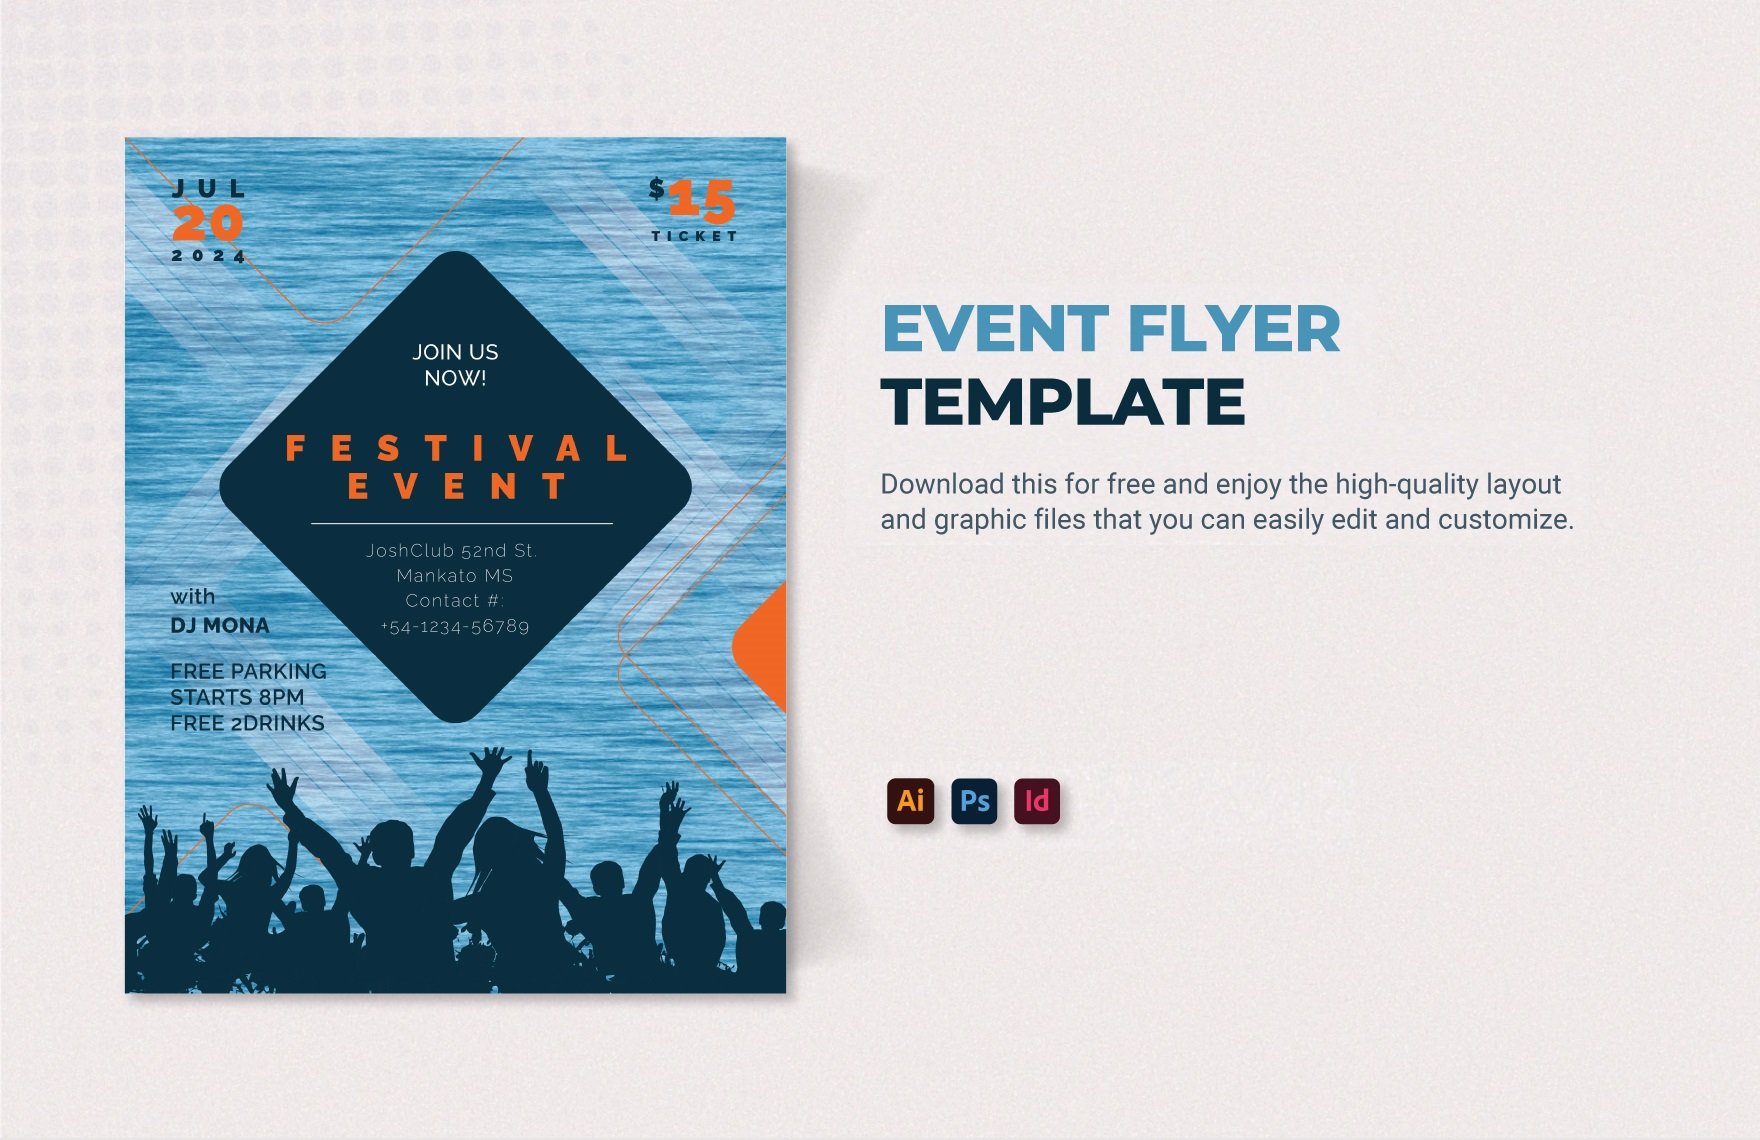 Event Flyer Template in Illustrator, PSD, InDesign